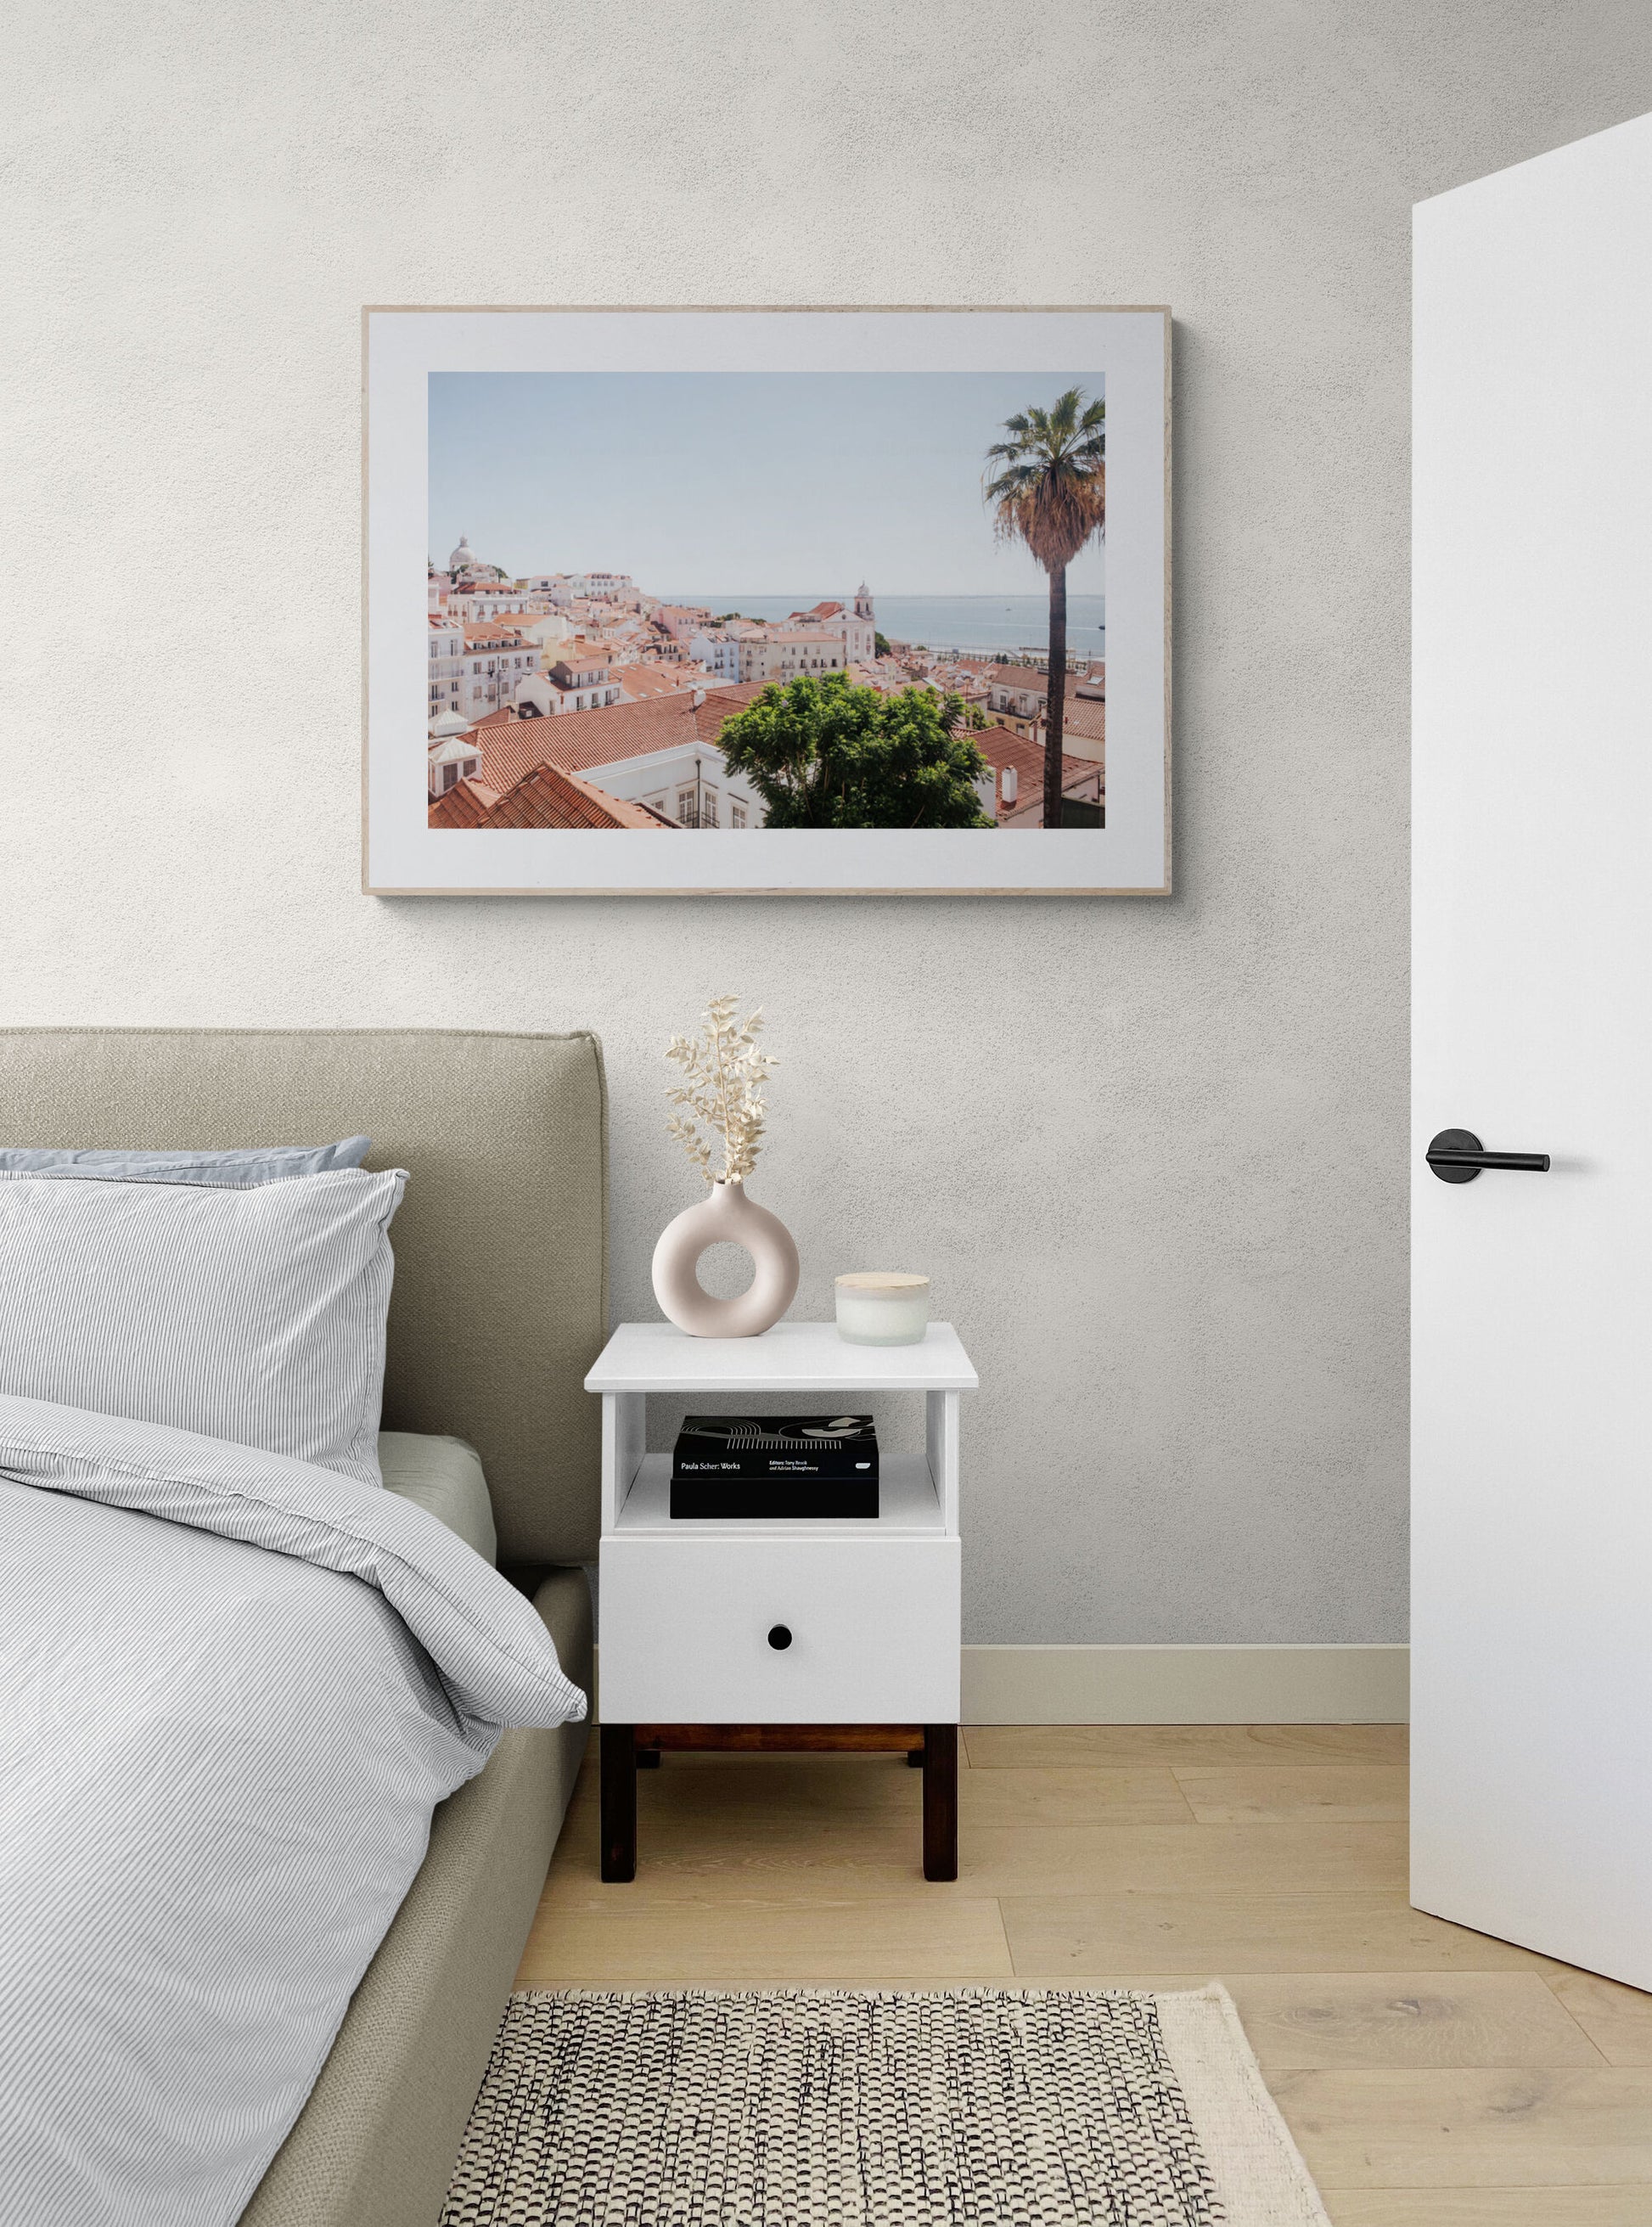 Lisbon Portugal rooftops photograph as travel wall art in a bedroom